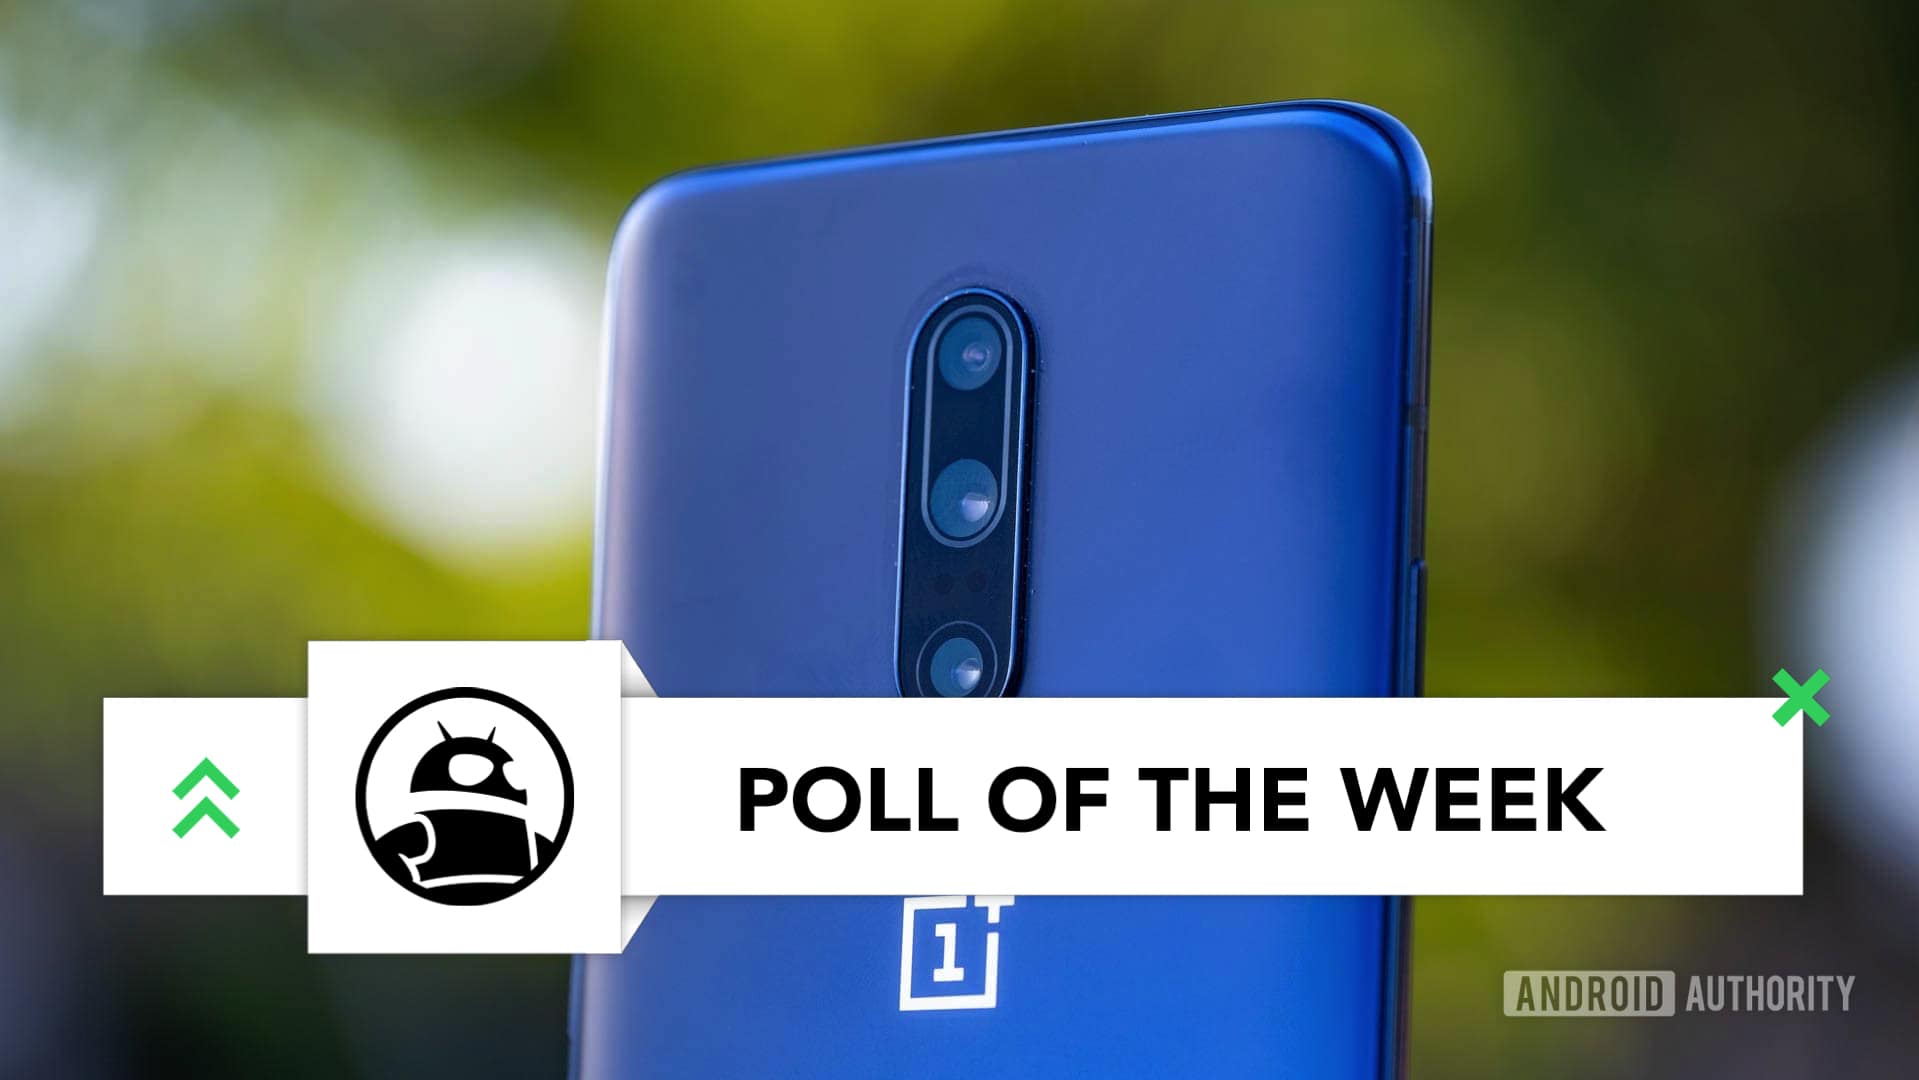 oneplus 7 pro rear cameras poll of the week aa